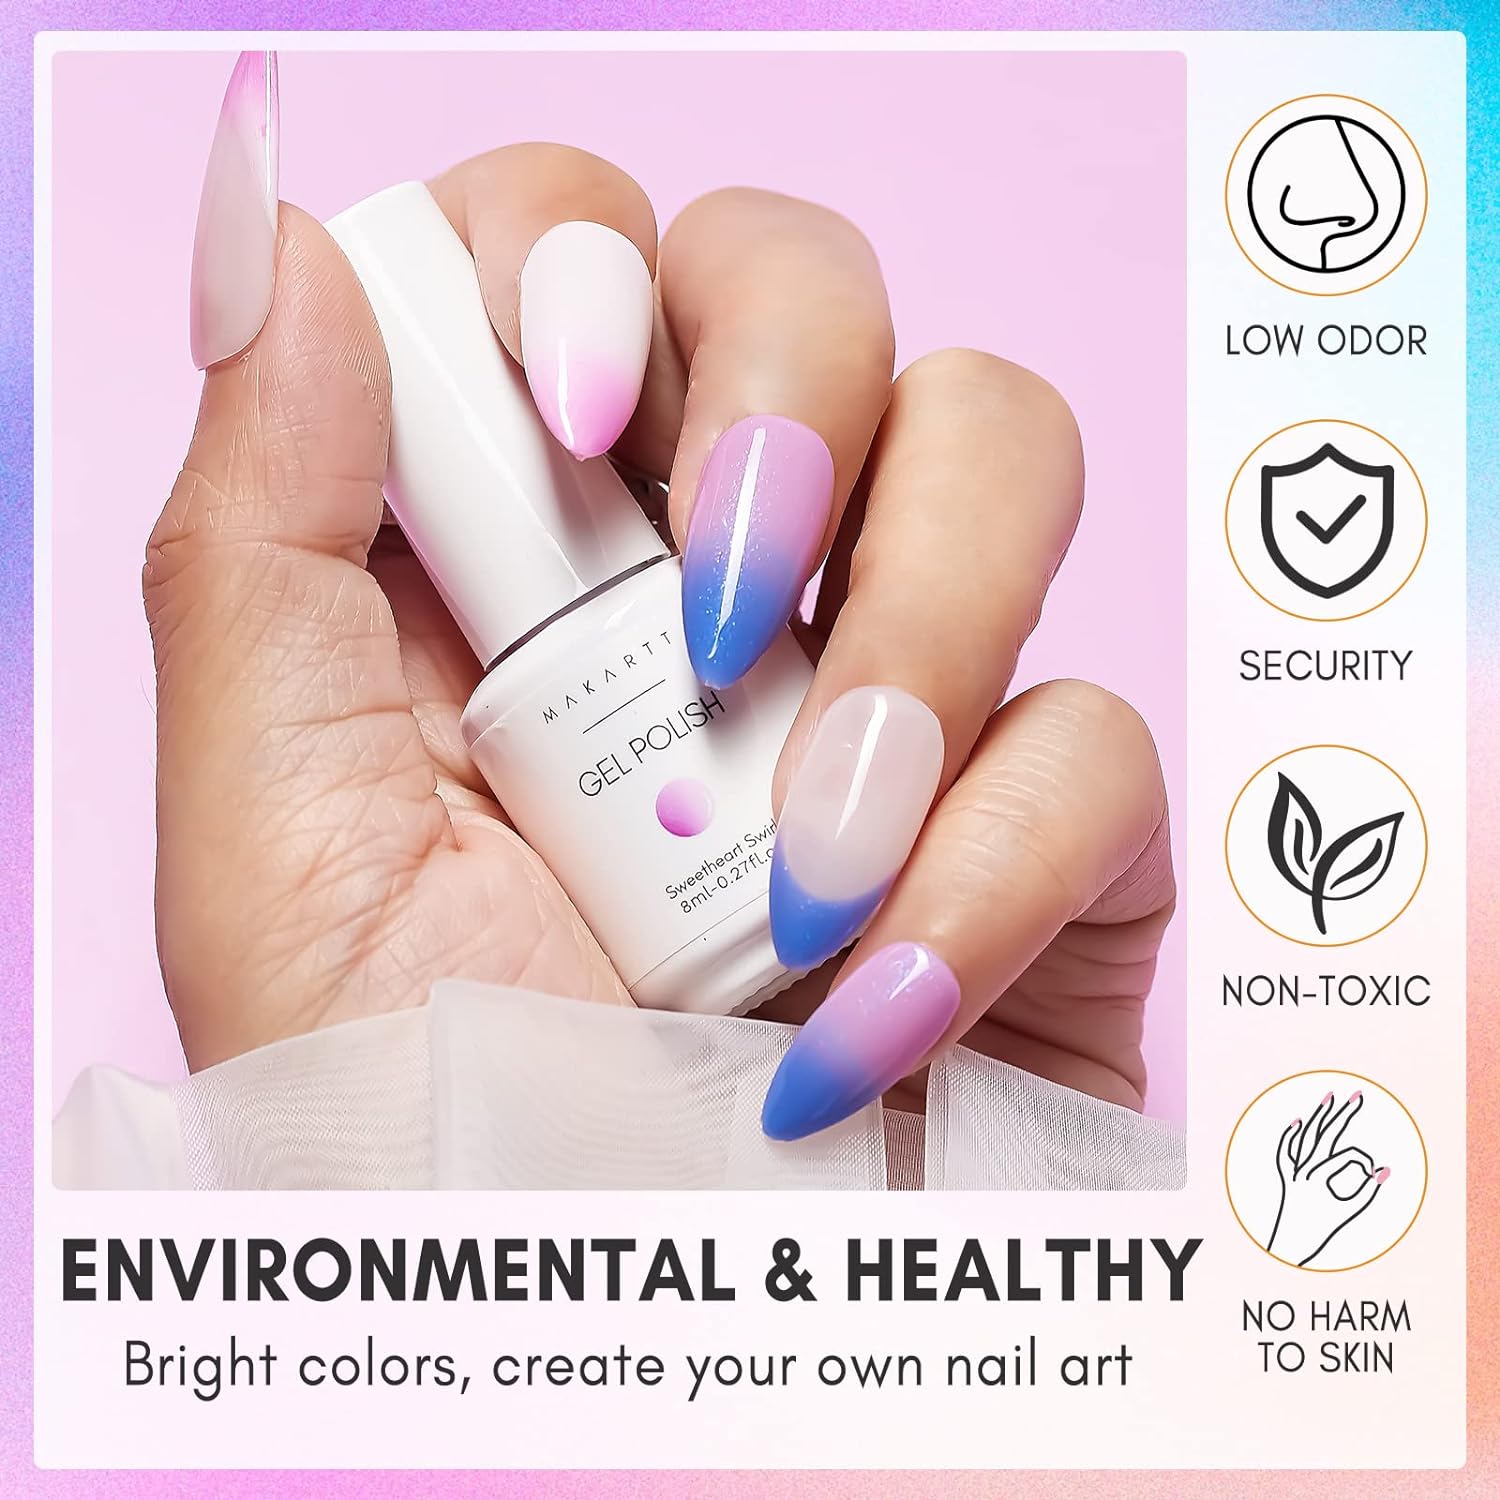 Buy Coscelia Color Changing Nail Polish Kit 4pcs Mood Gel Nail Polish Set  Temperature Change Purple Pink Blue Glitter Gel Nails Set for Nails Art DIY  Online at Low Prices in India -